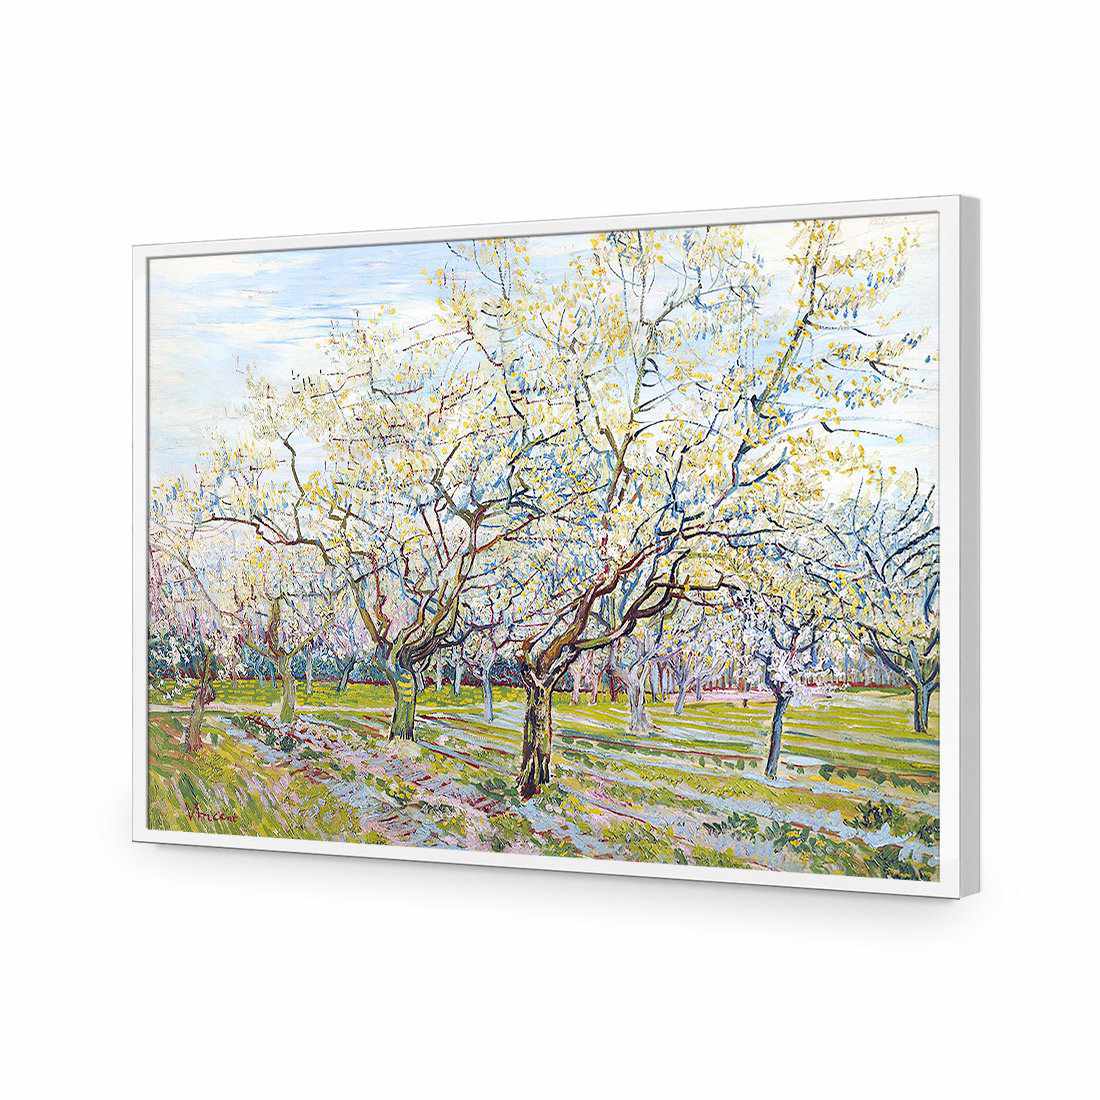 The White Orchard - Van Gogh-Acrylic-Wall Art Design-Without Border-Acrylic - White Frame-45x30cm-Wall Art Designs